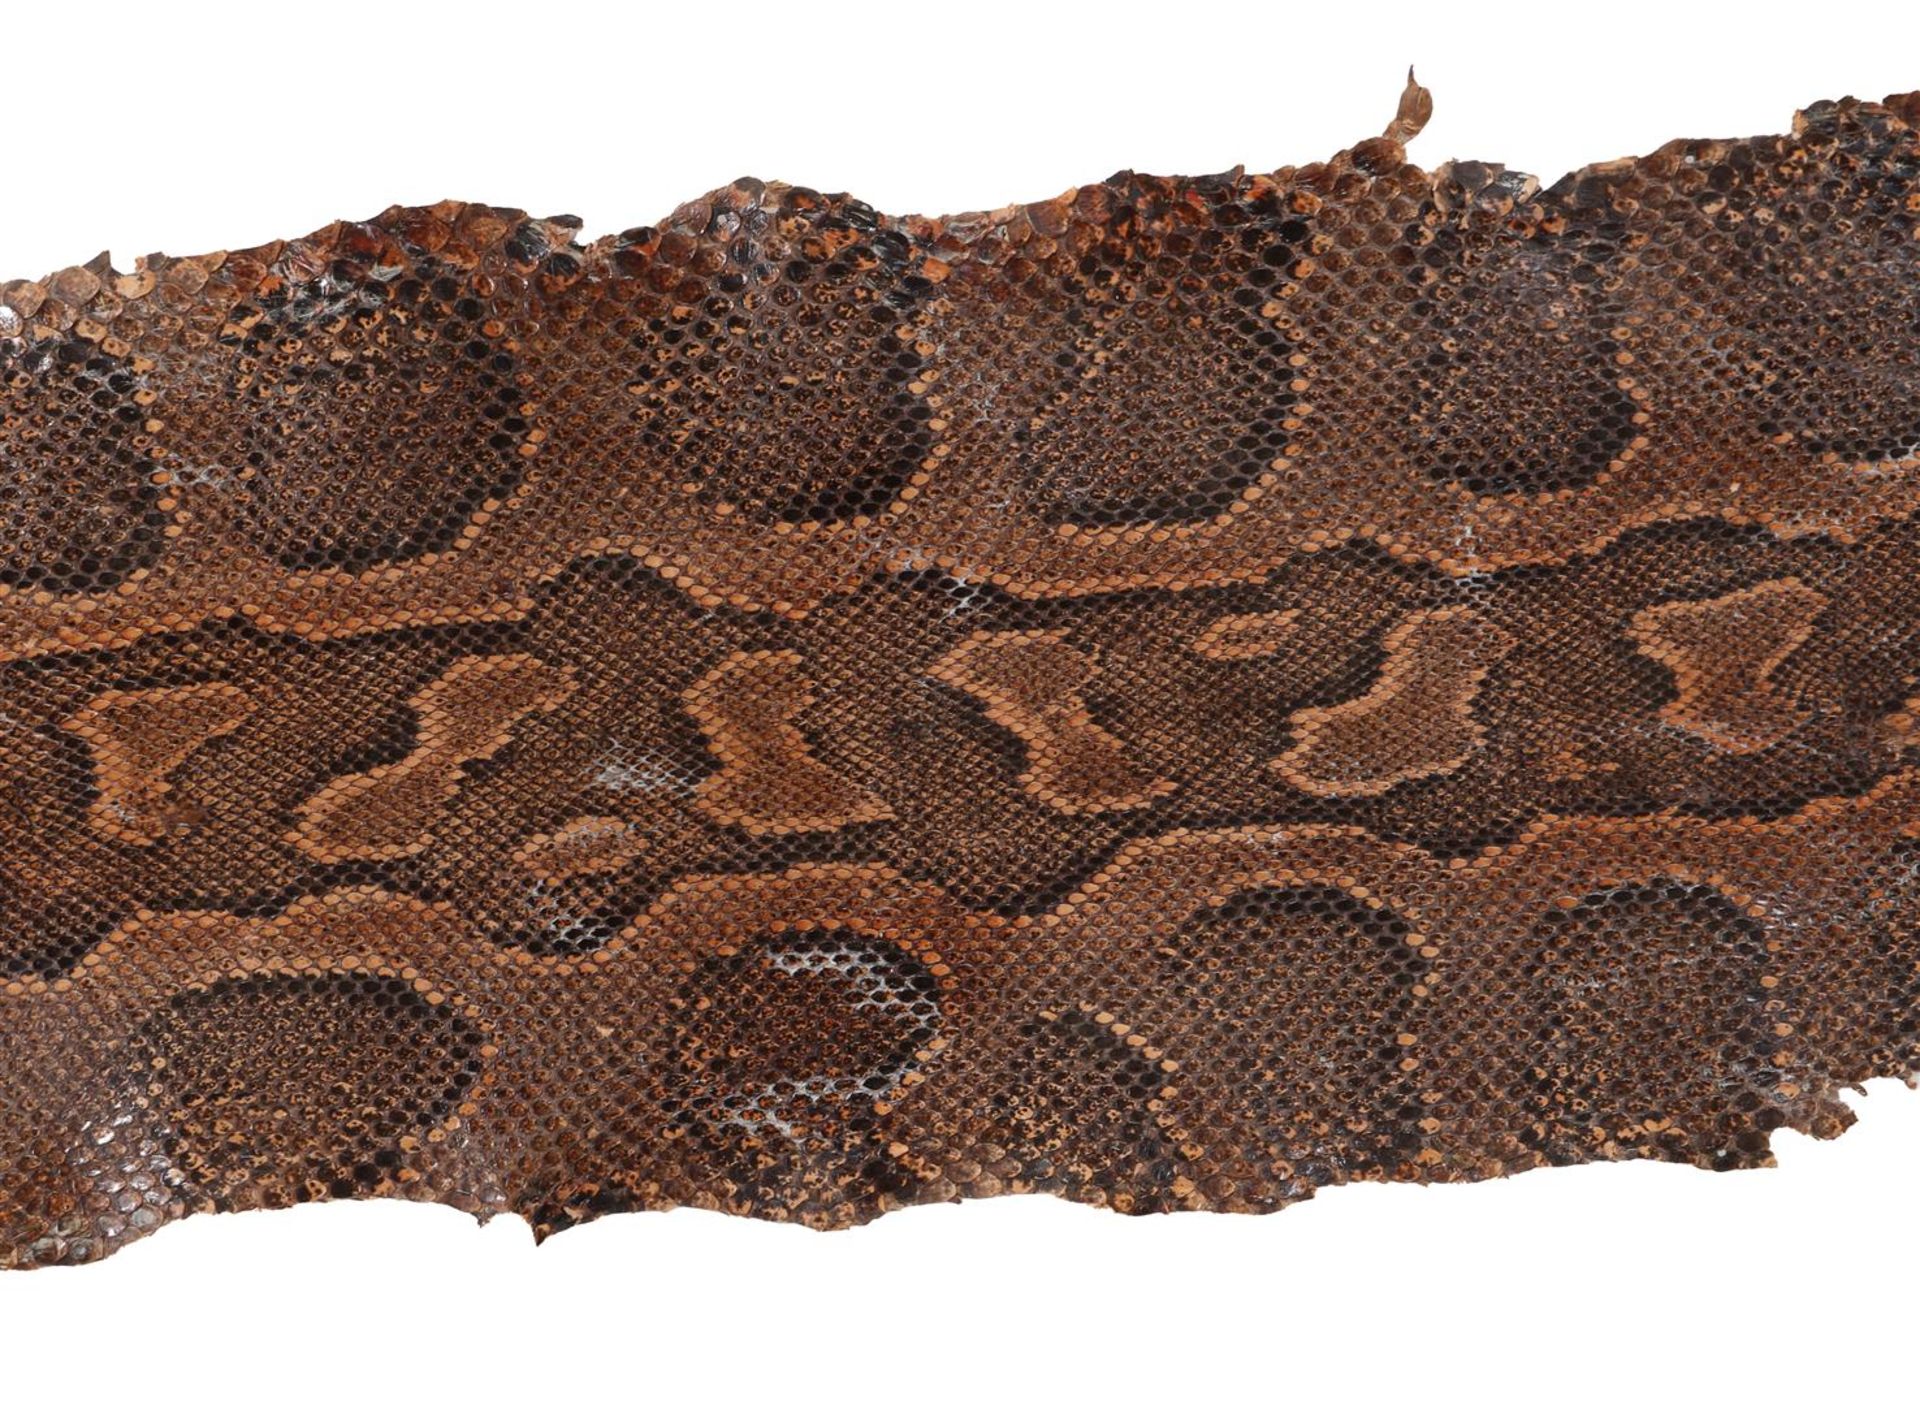 Skin of a python - Image 6 of 8